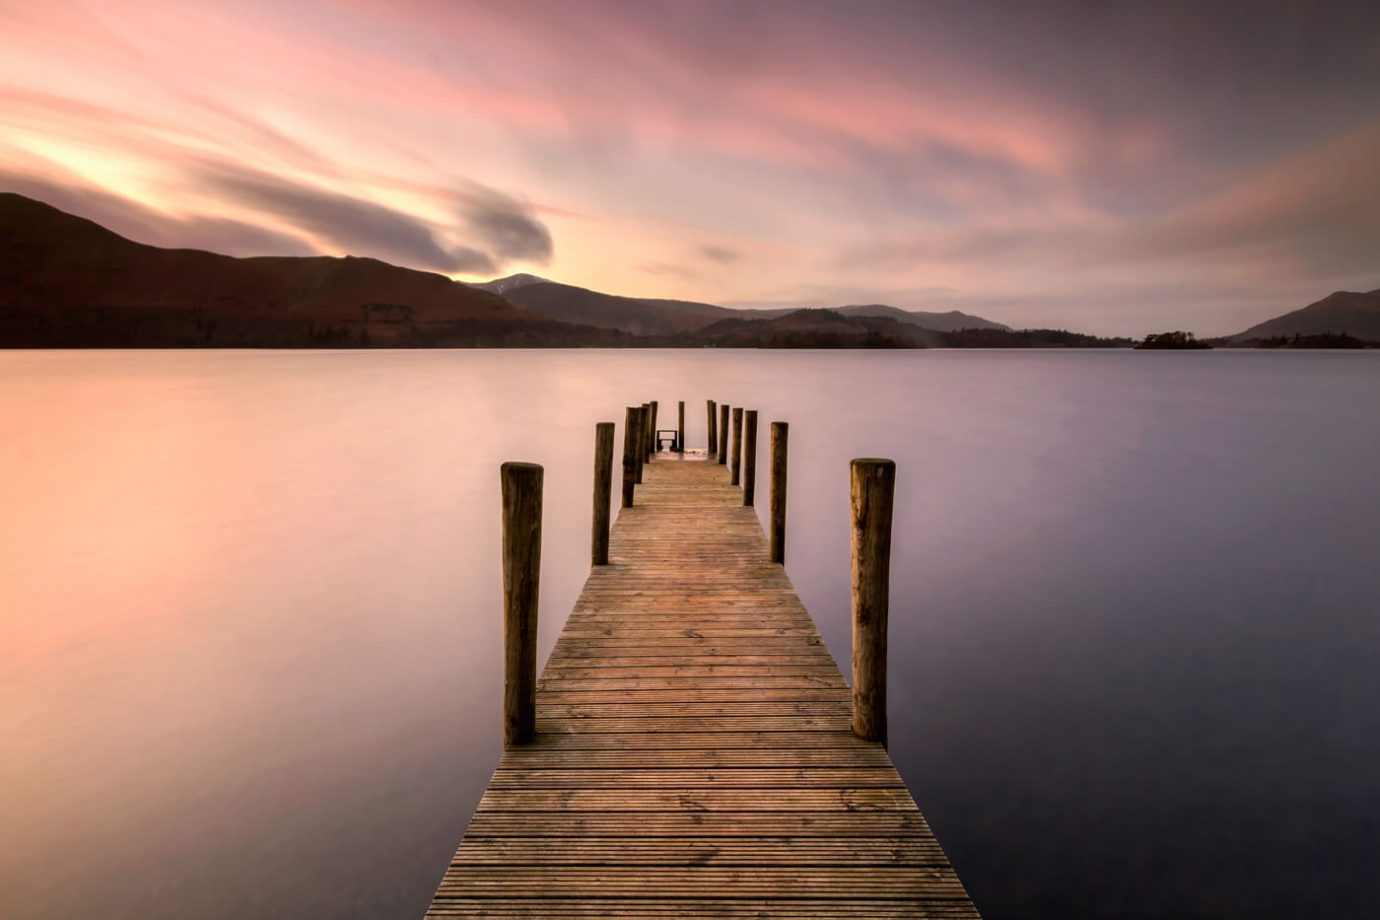 Lake District Photography Workshops - Shoot stunning scenery